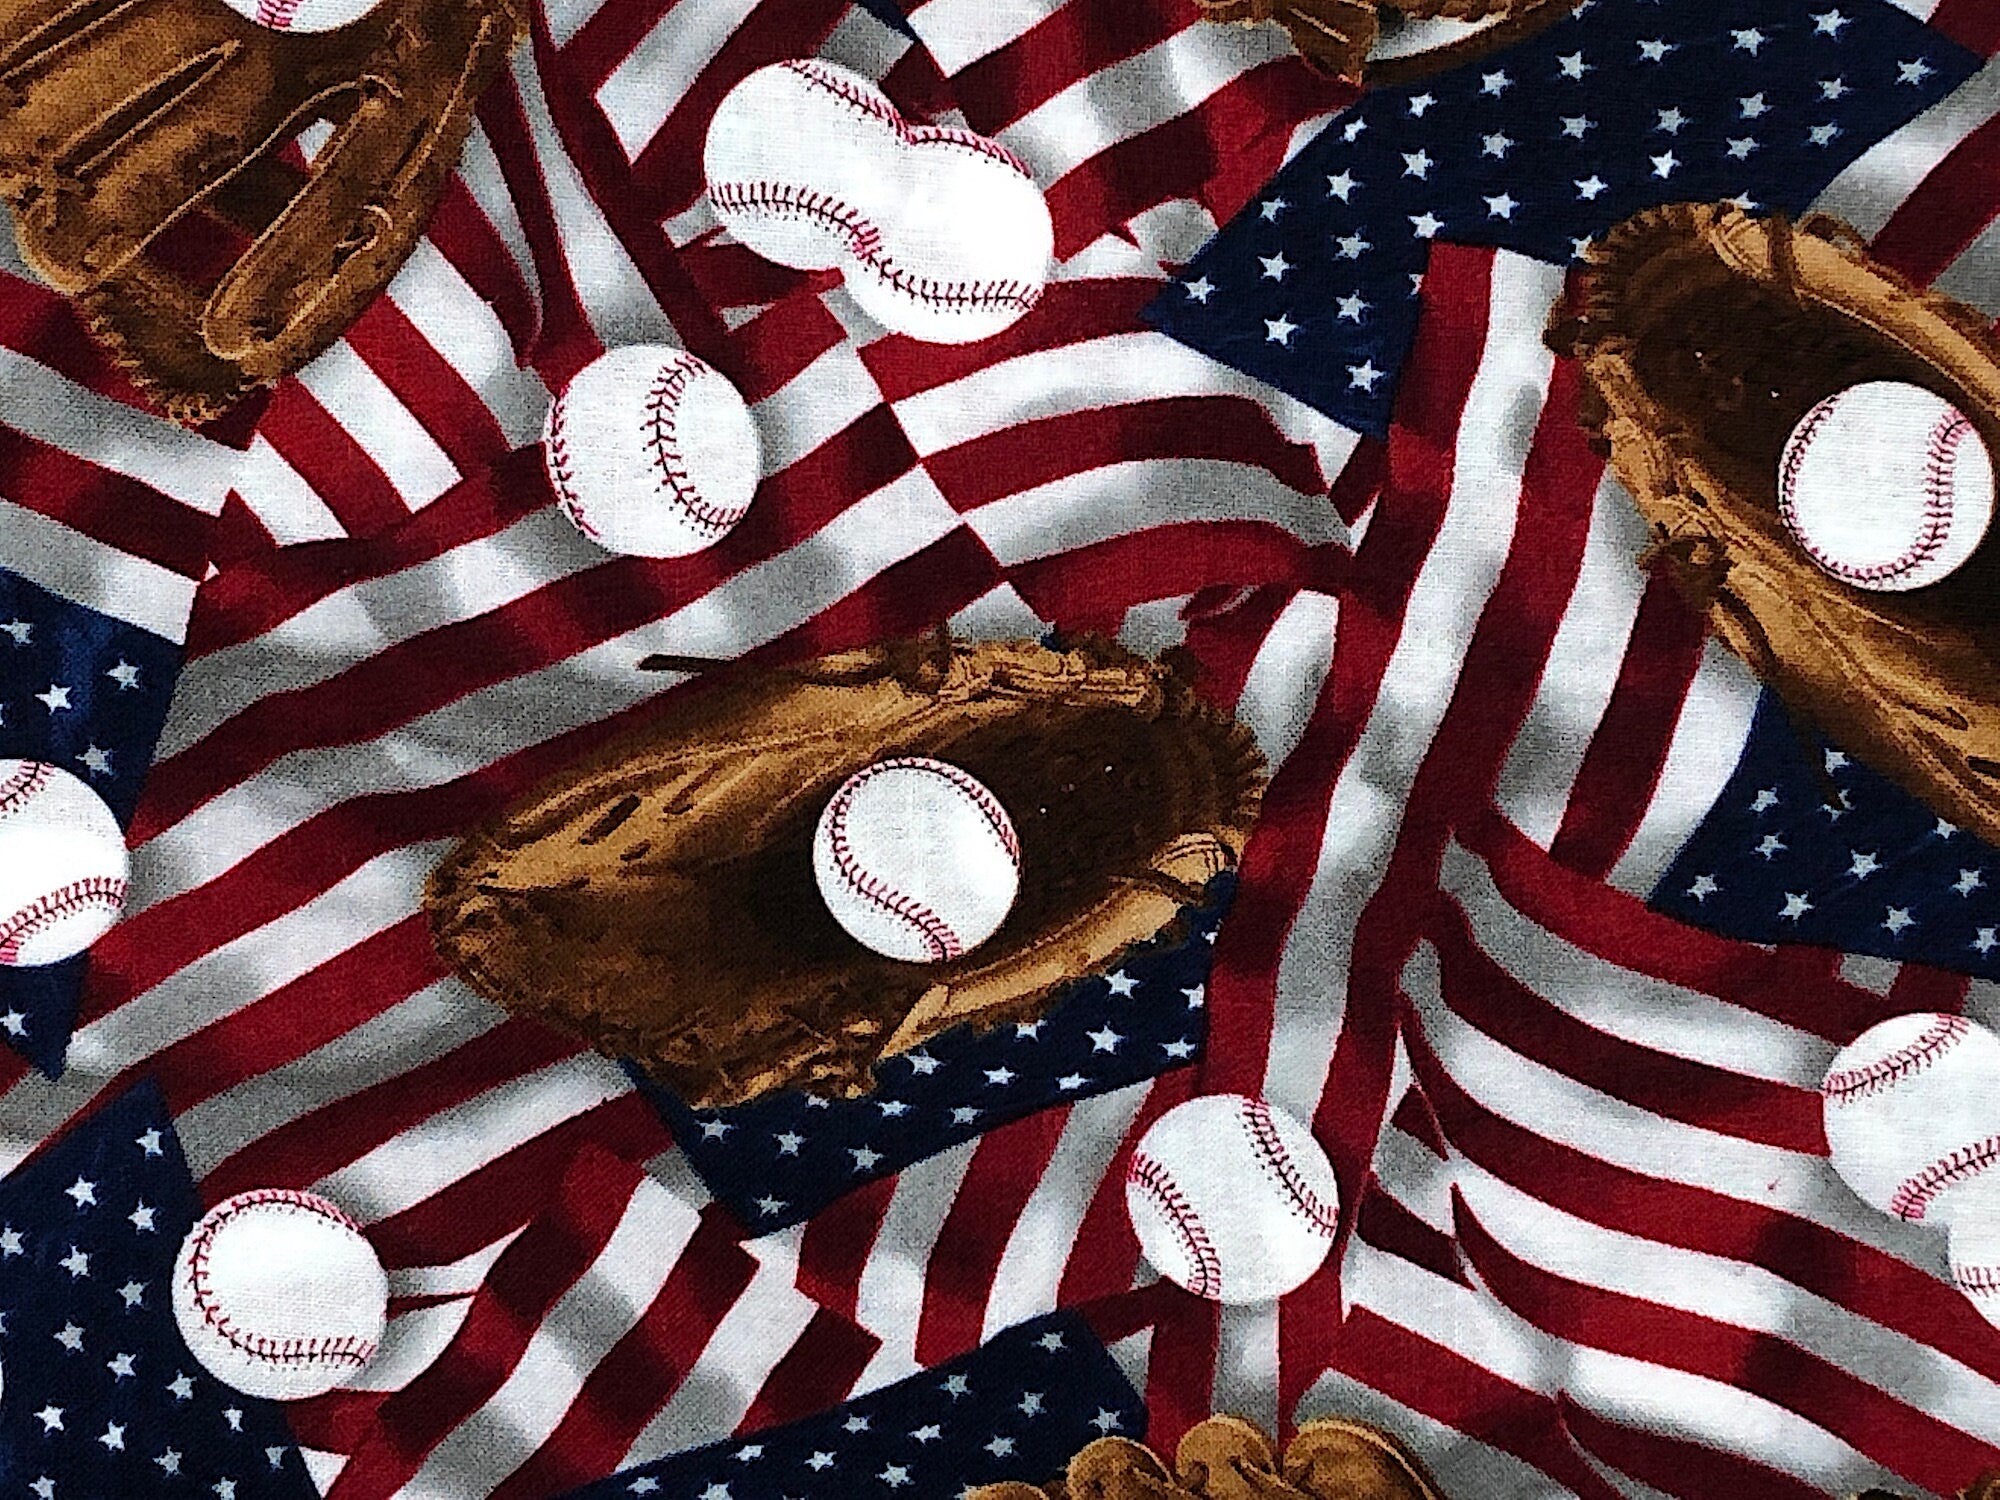 Close up of baseball mitts, gloves and USA flags.